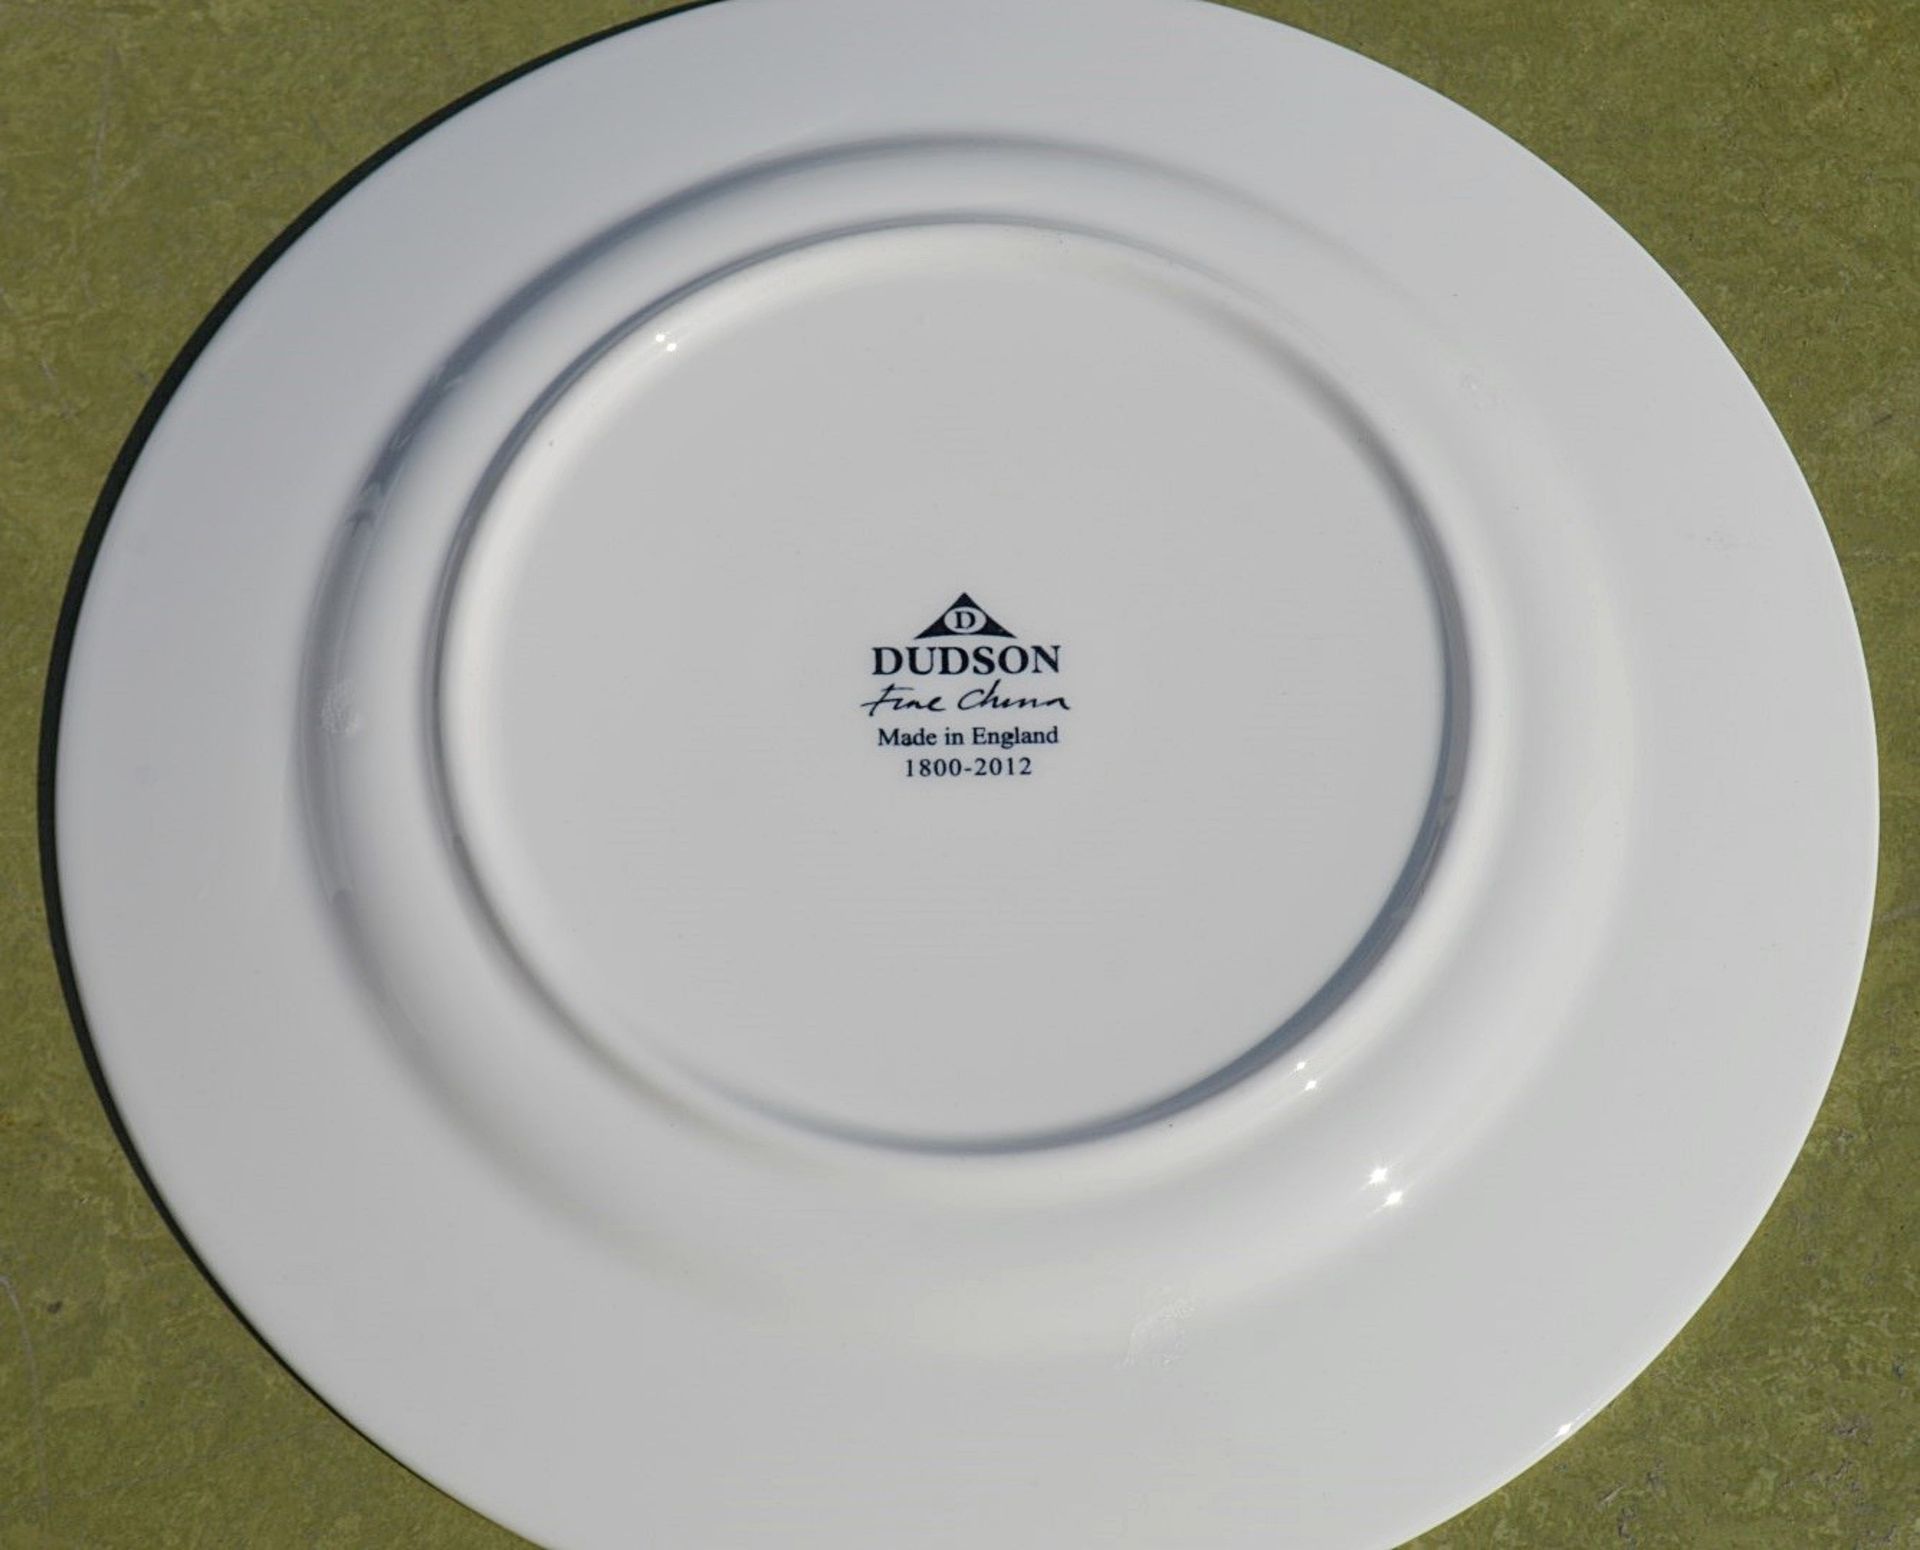 24 x DUDSON Fine China 'Georgian' 20.3cm Plates With 'Famous Branding' (2IWP230G) - Recently Removed - Image 3 of 3